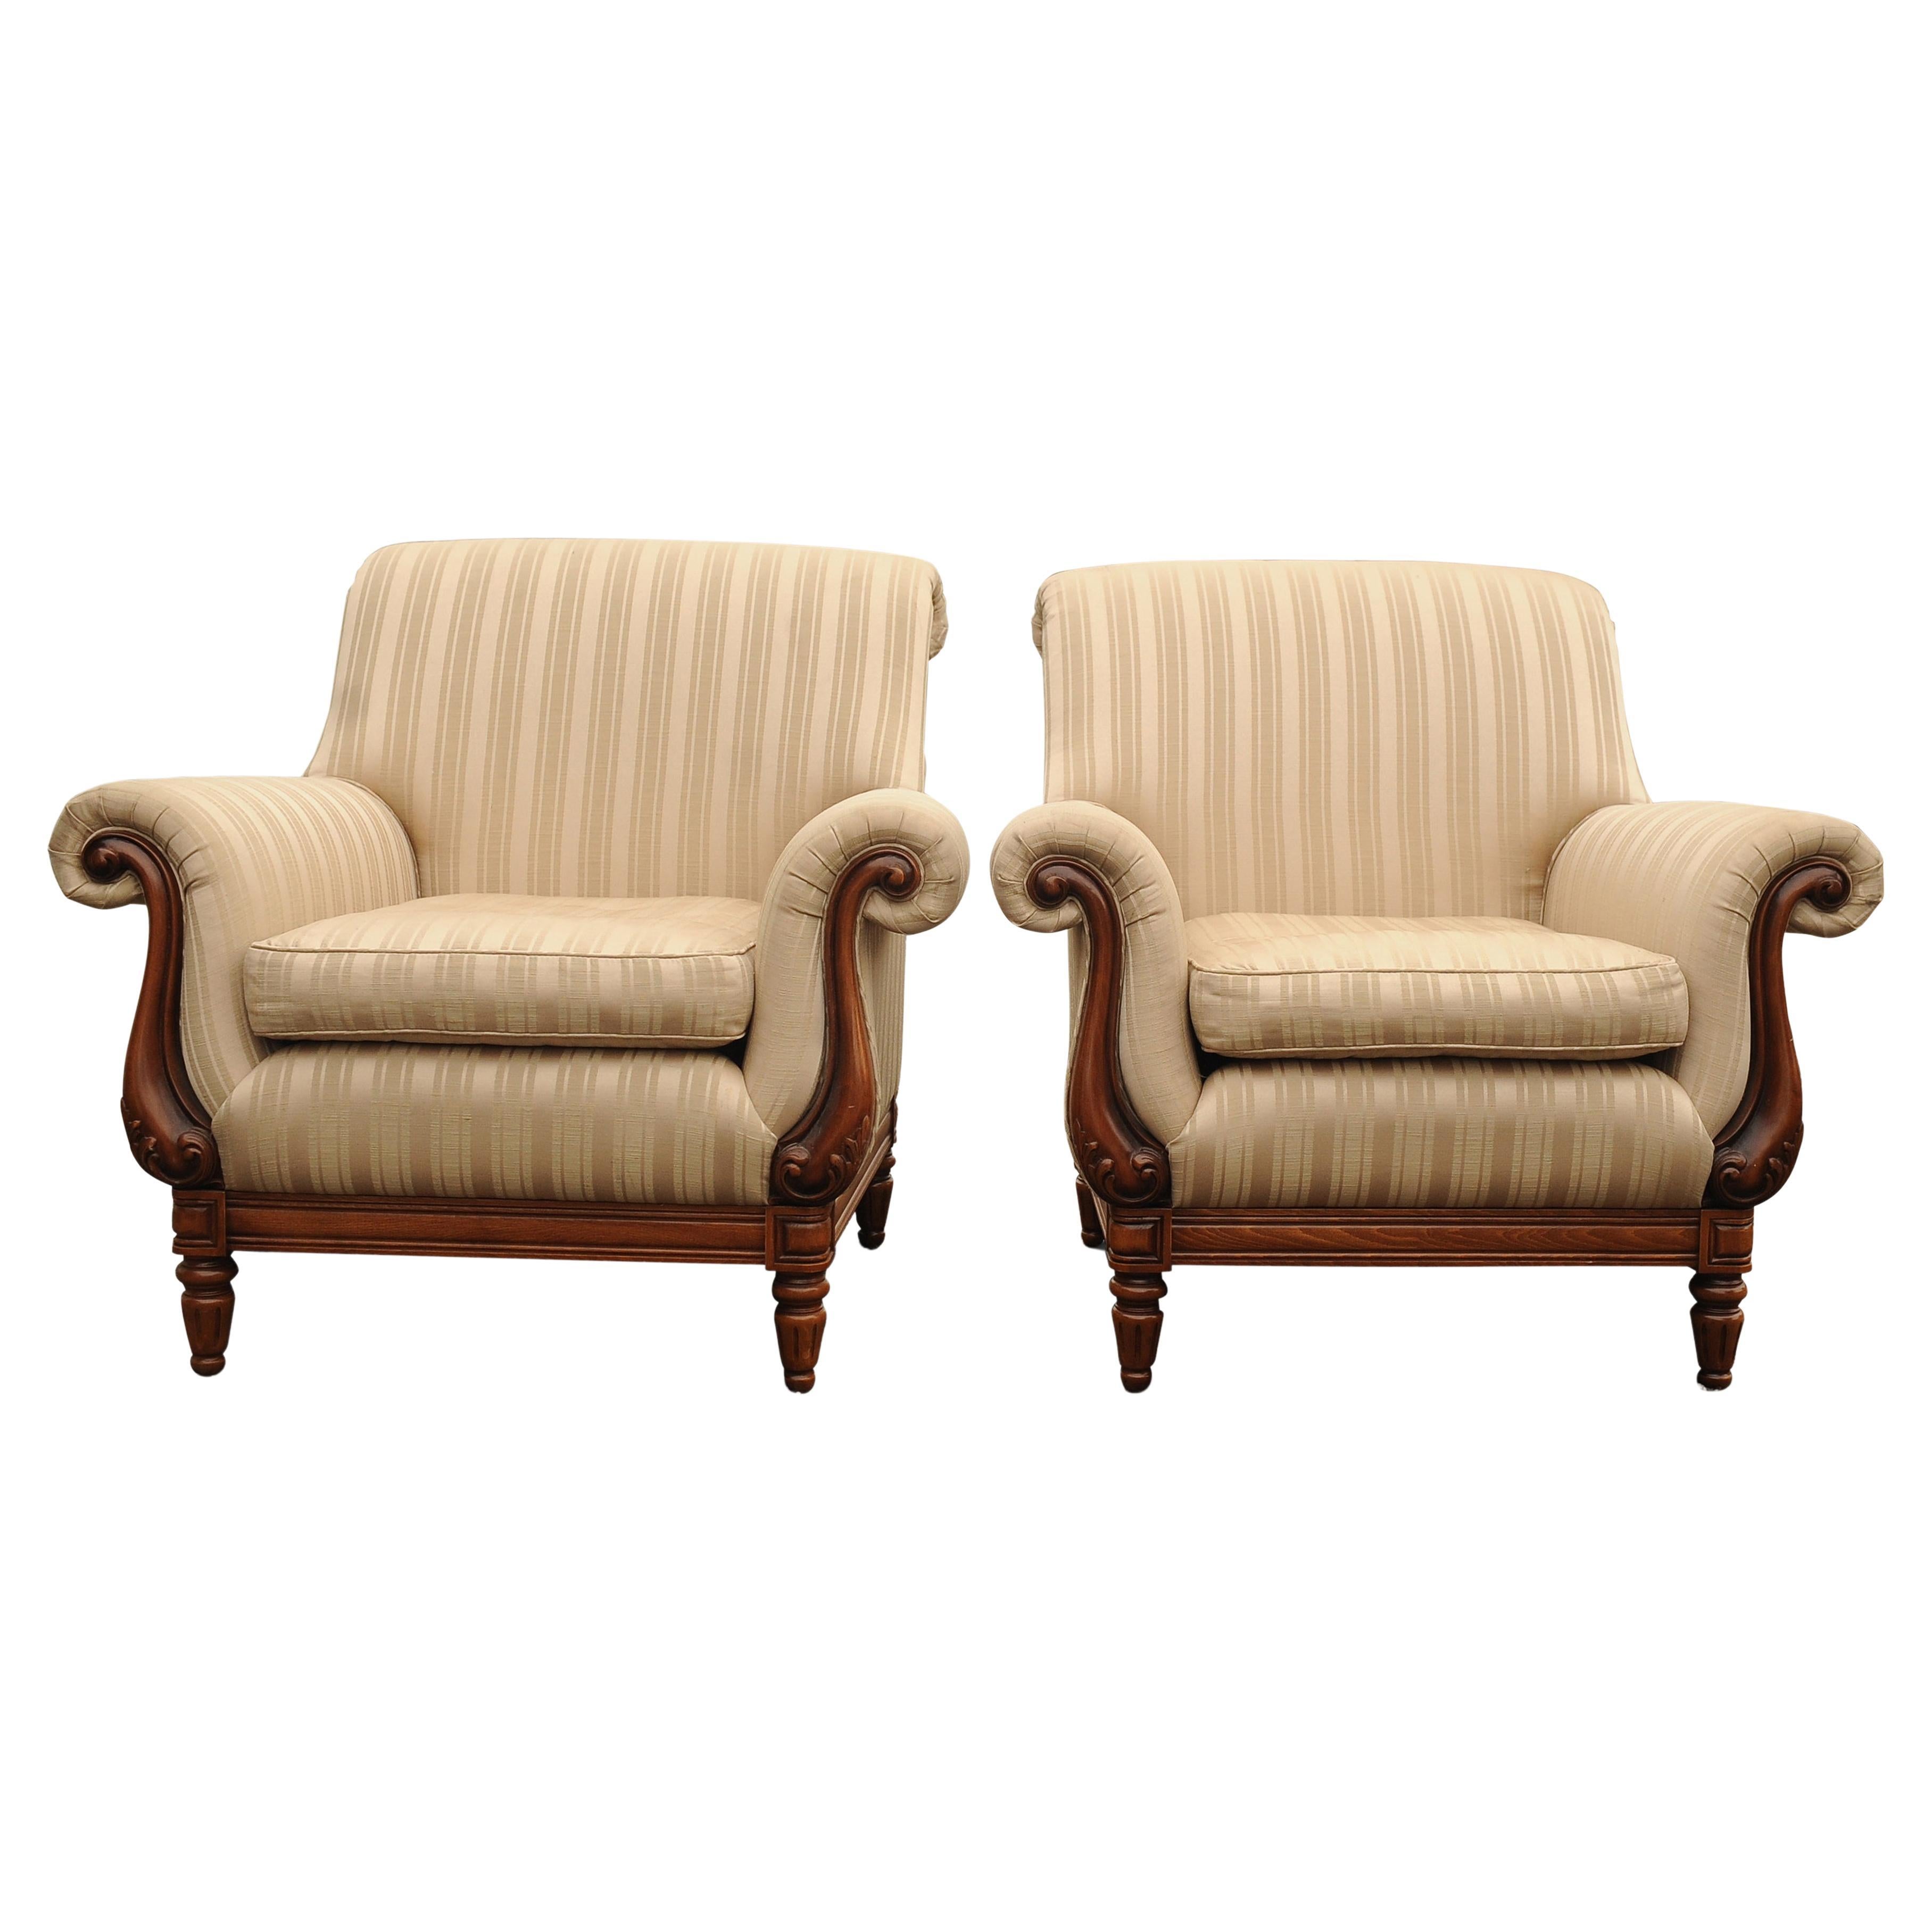 Pair of William IV Empire Design Library Armchairs Striped Cream Silk Upholstery